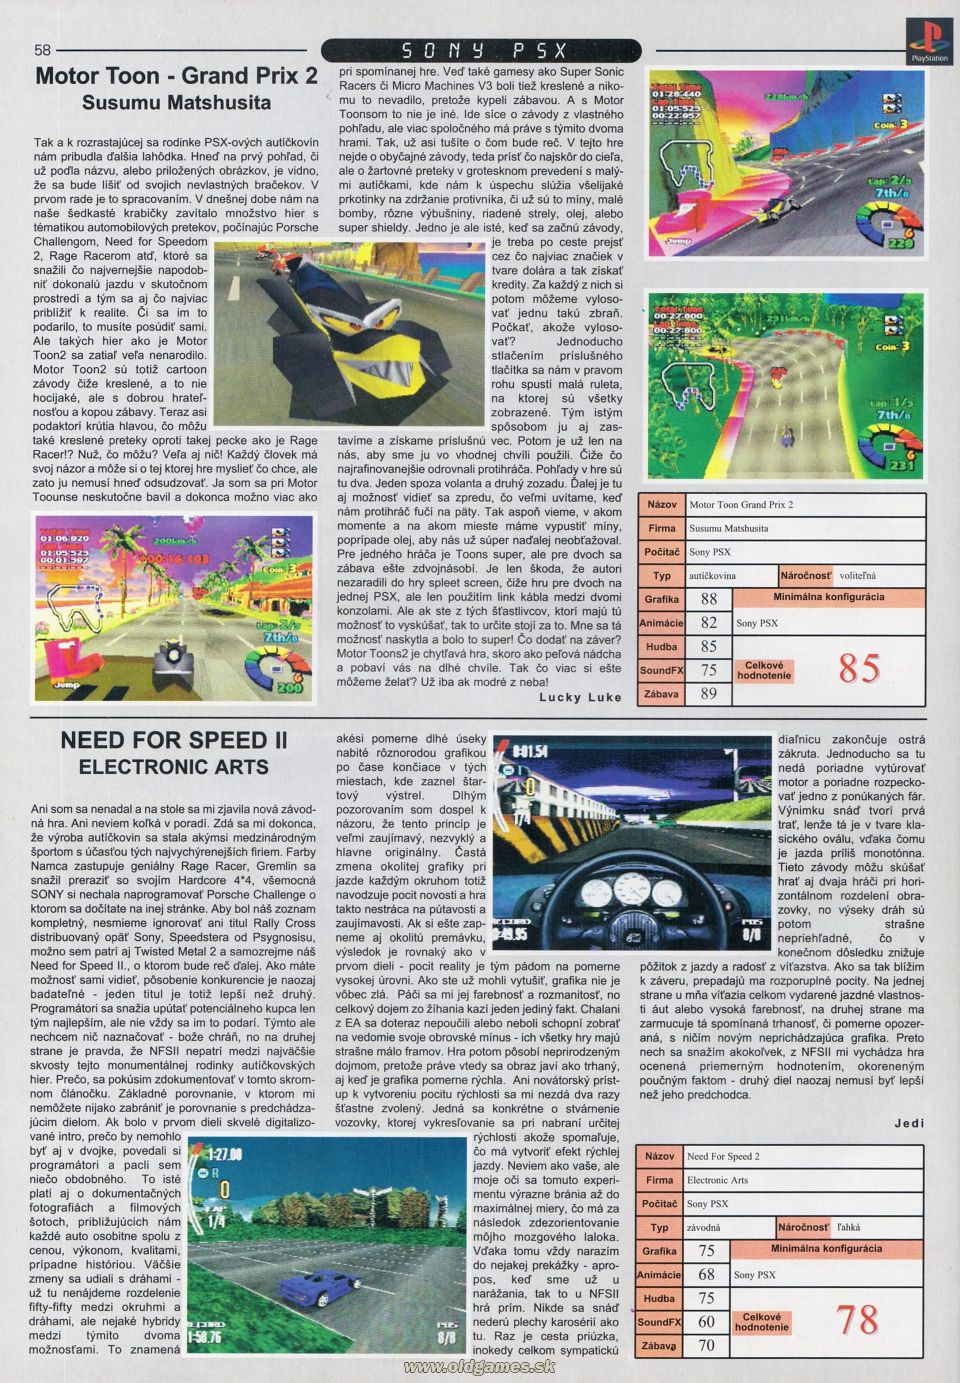 Motor Toon GP2, Need for Speed 2 (PSX)